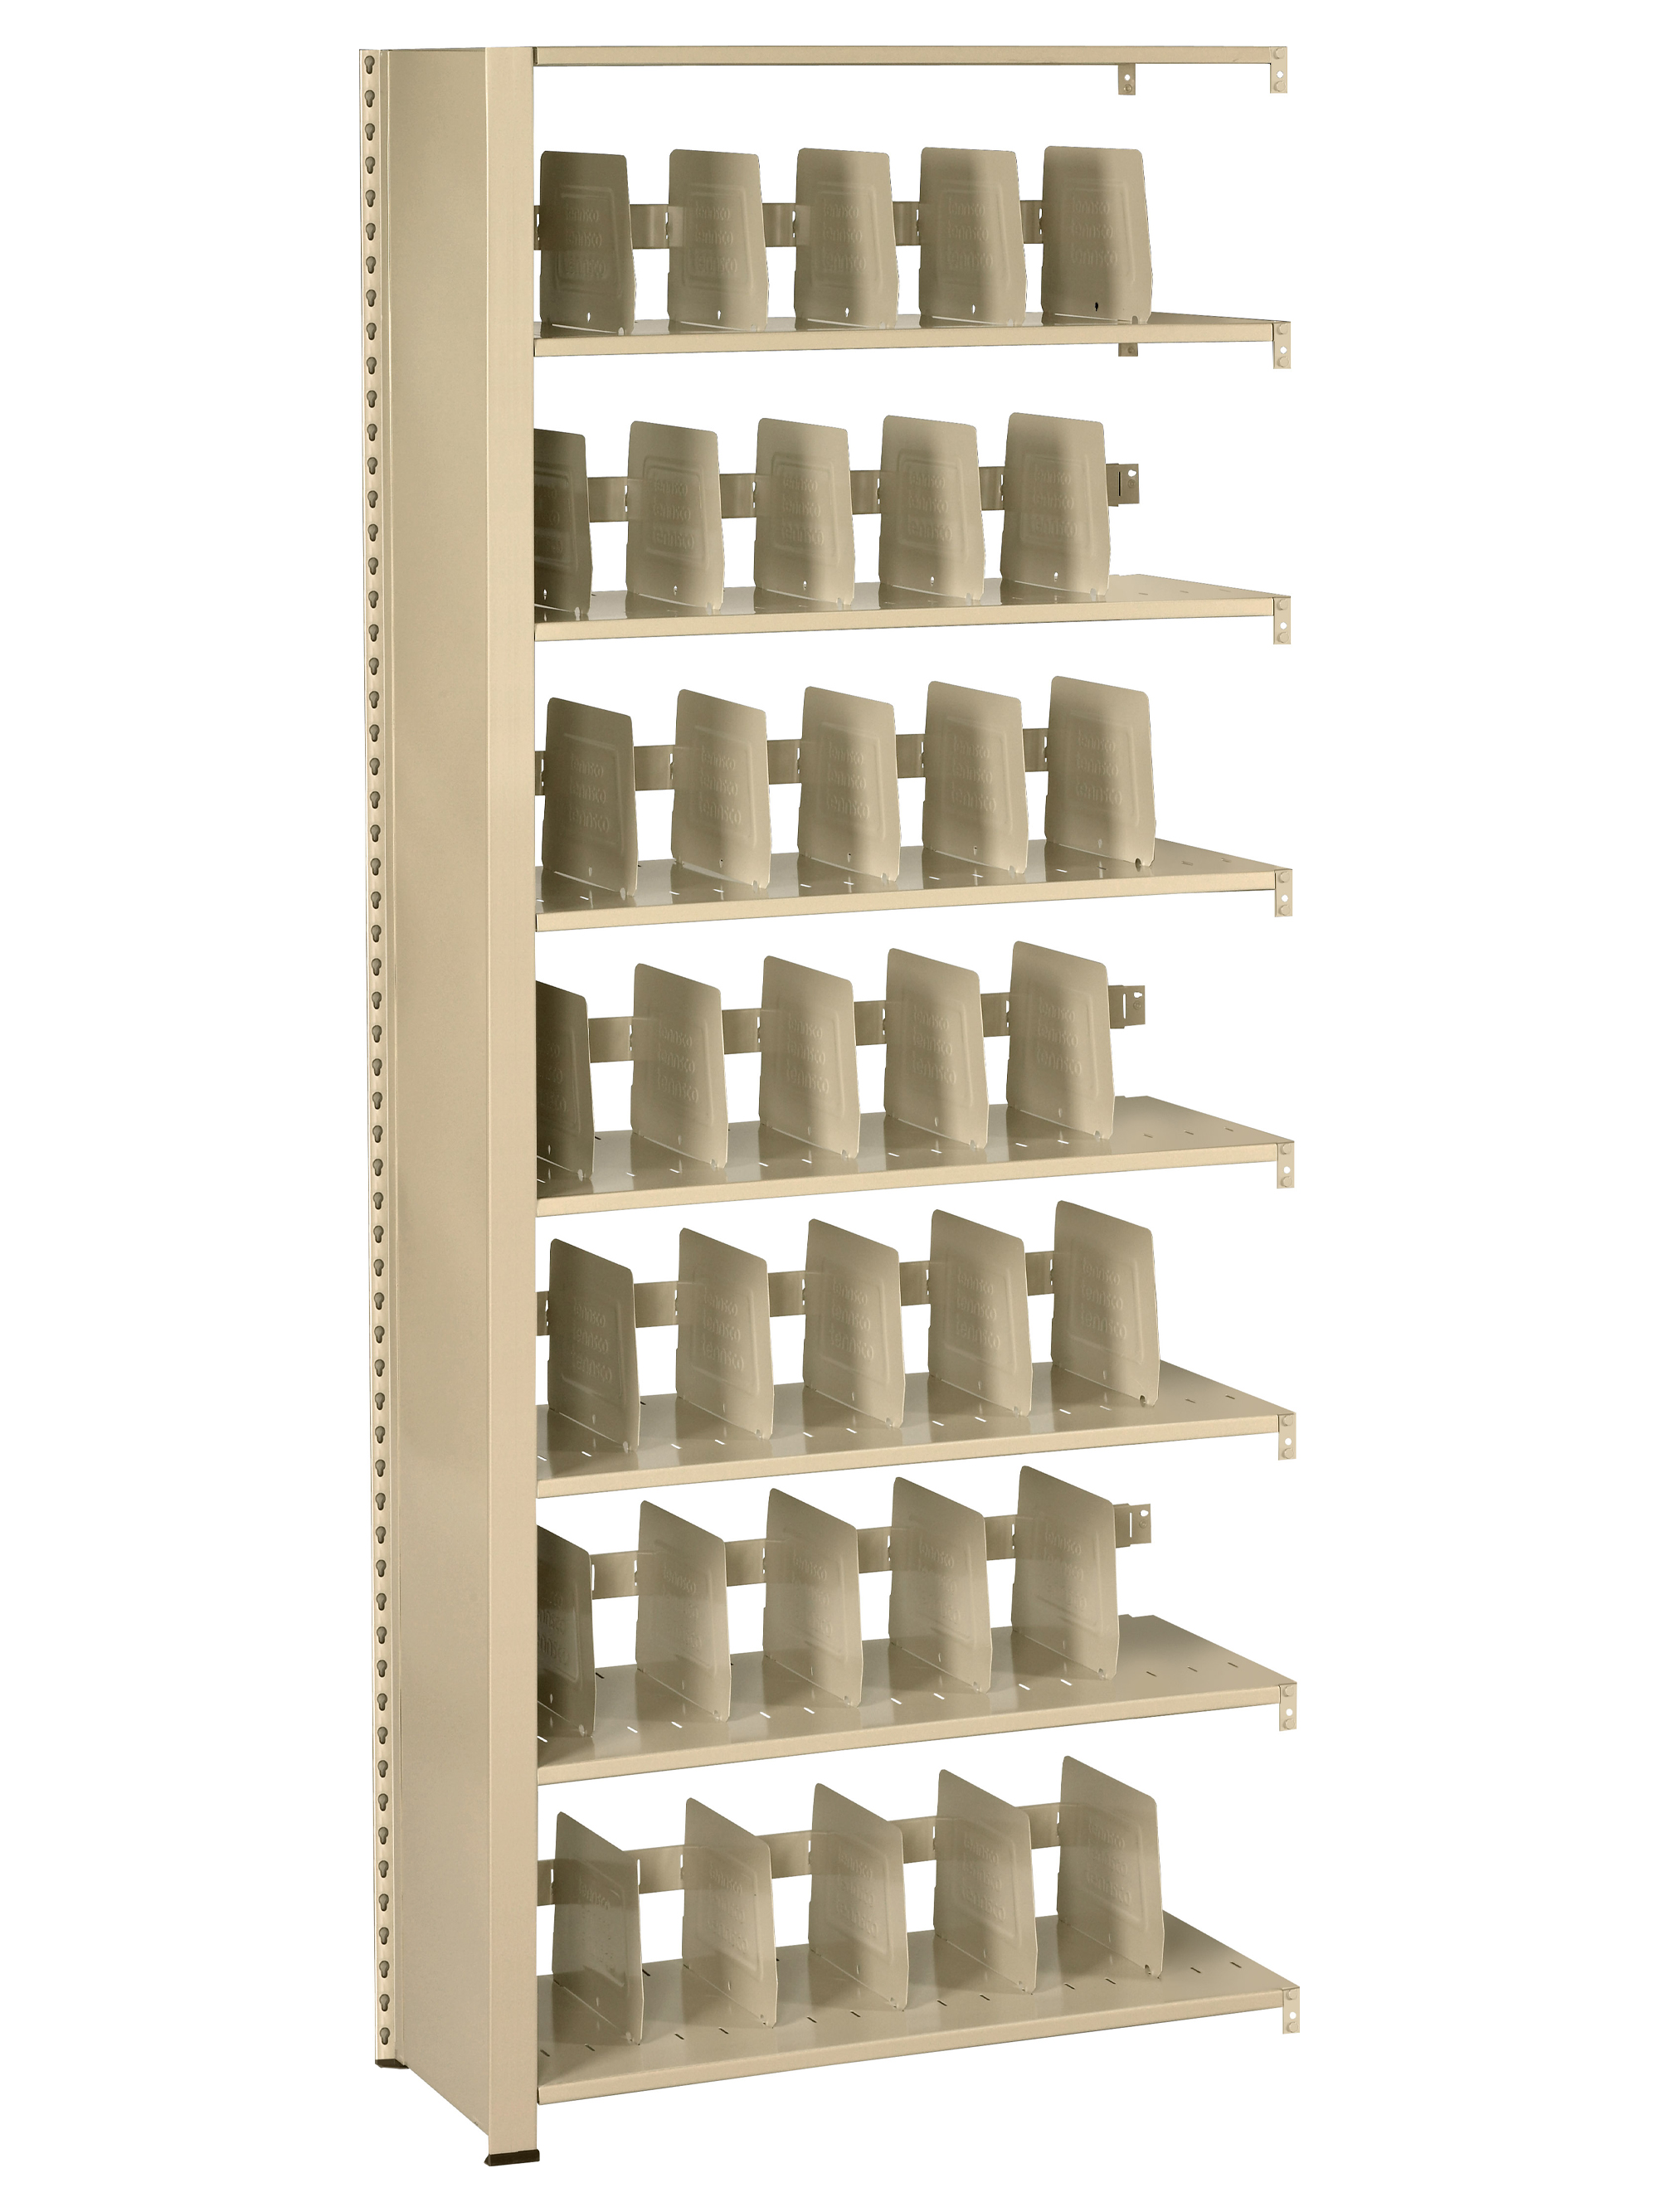 248848AC 48 x 88 Imperial Shelving Add-On